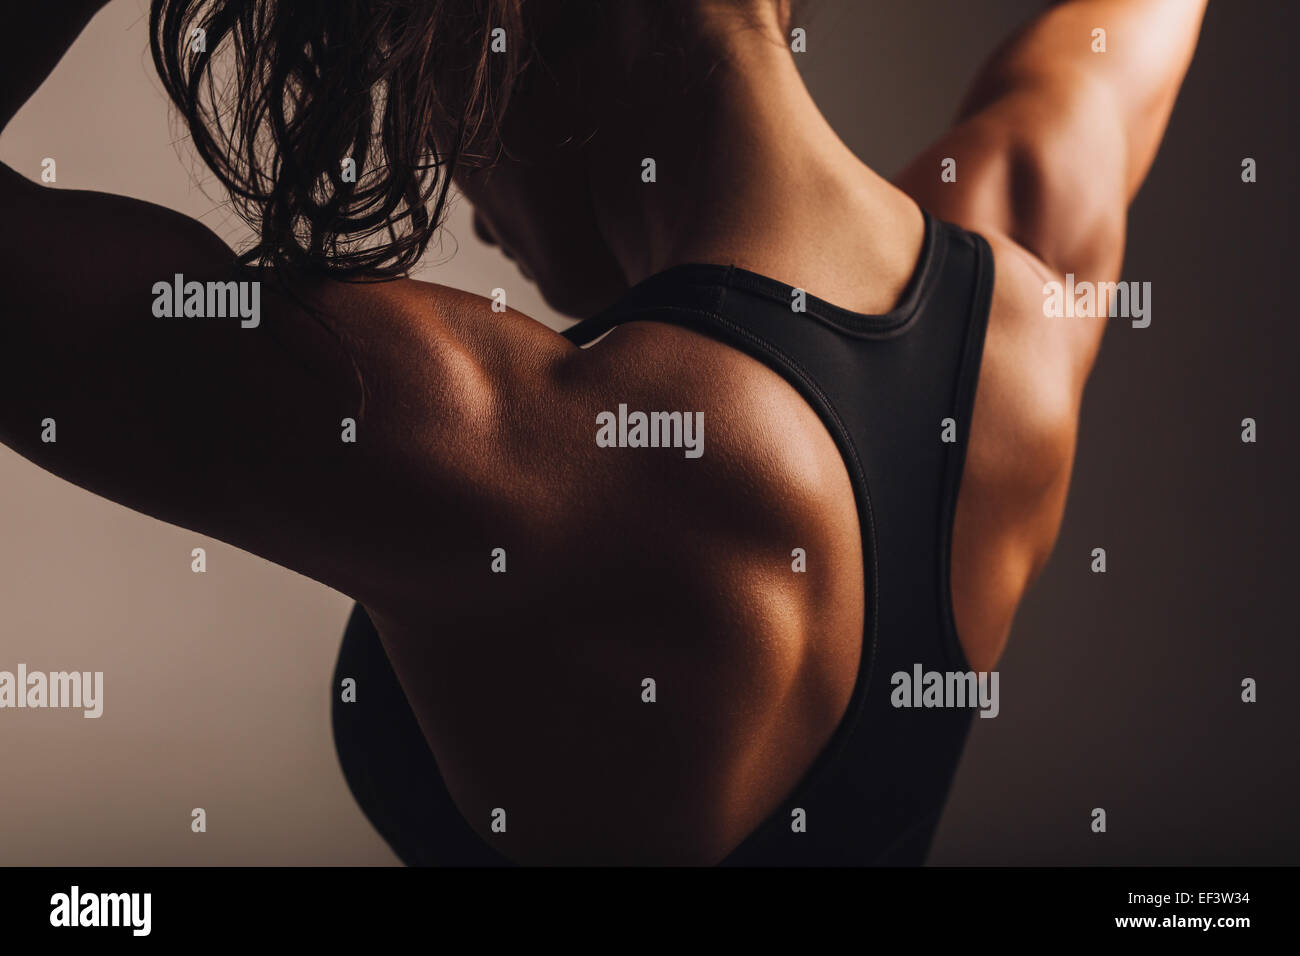 Close-up shot of back of female fitness model. Young woman in sports wear with muscular body. Stock Photo